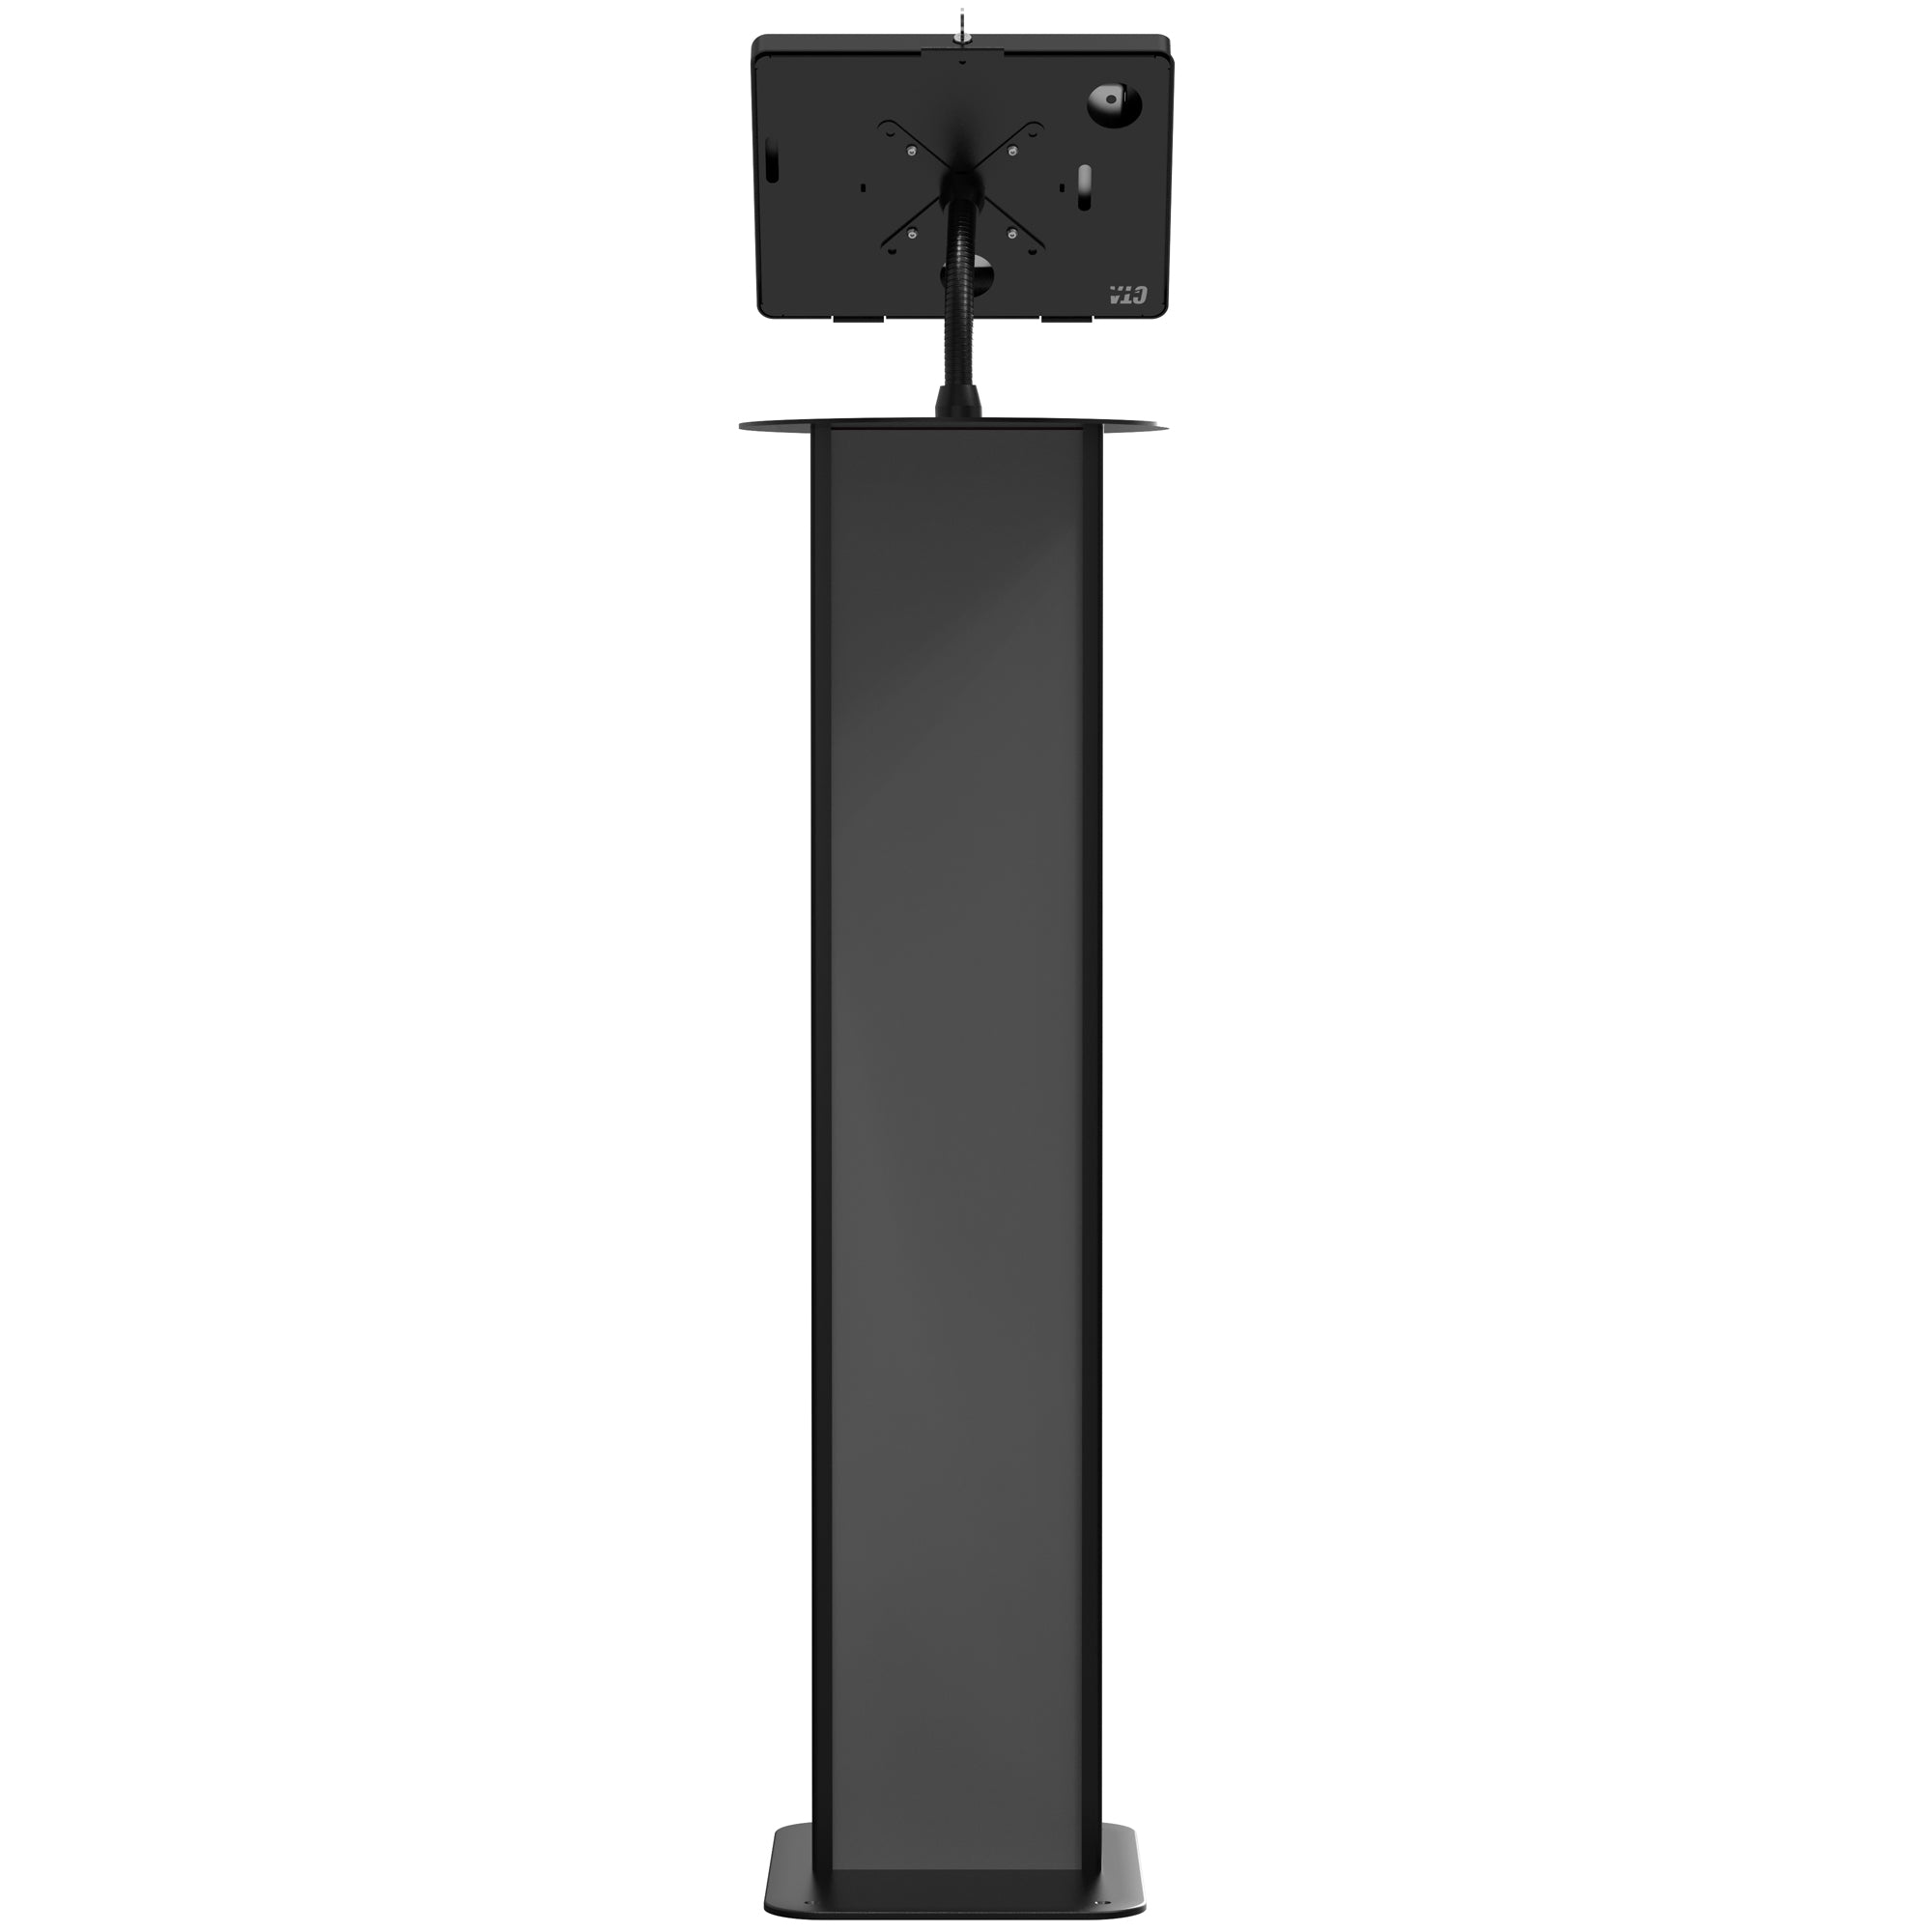 Premium Floor Stand Workstation with Universal Security Enclosure